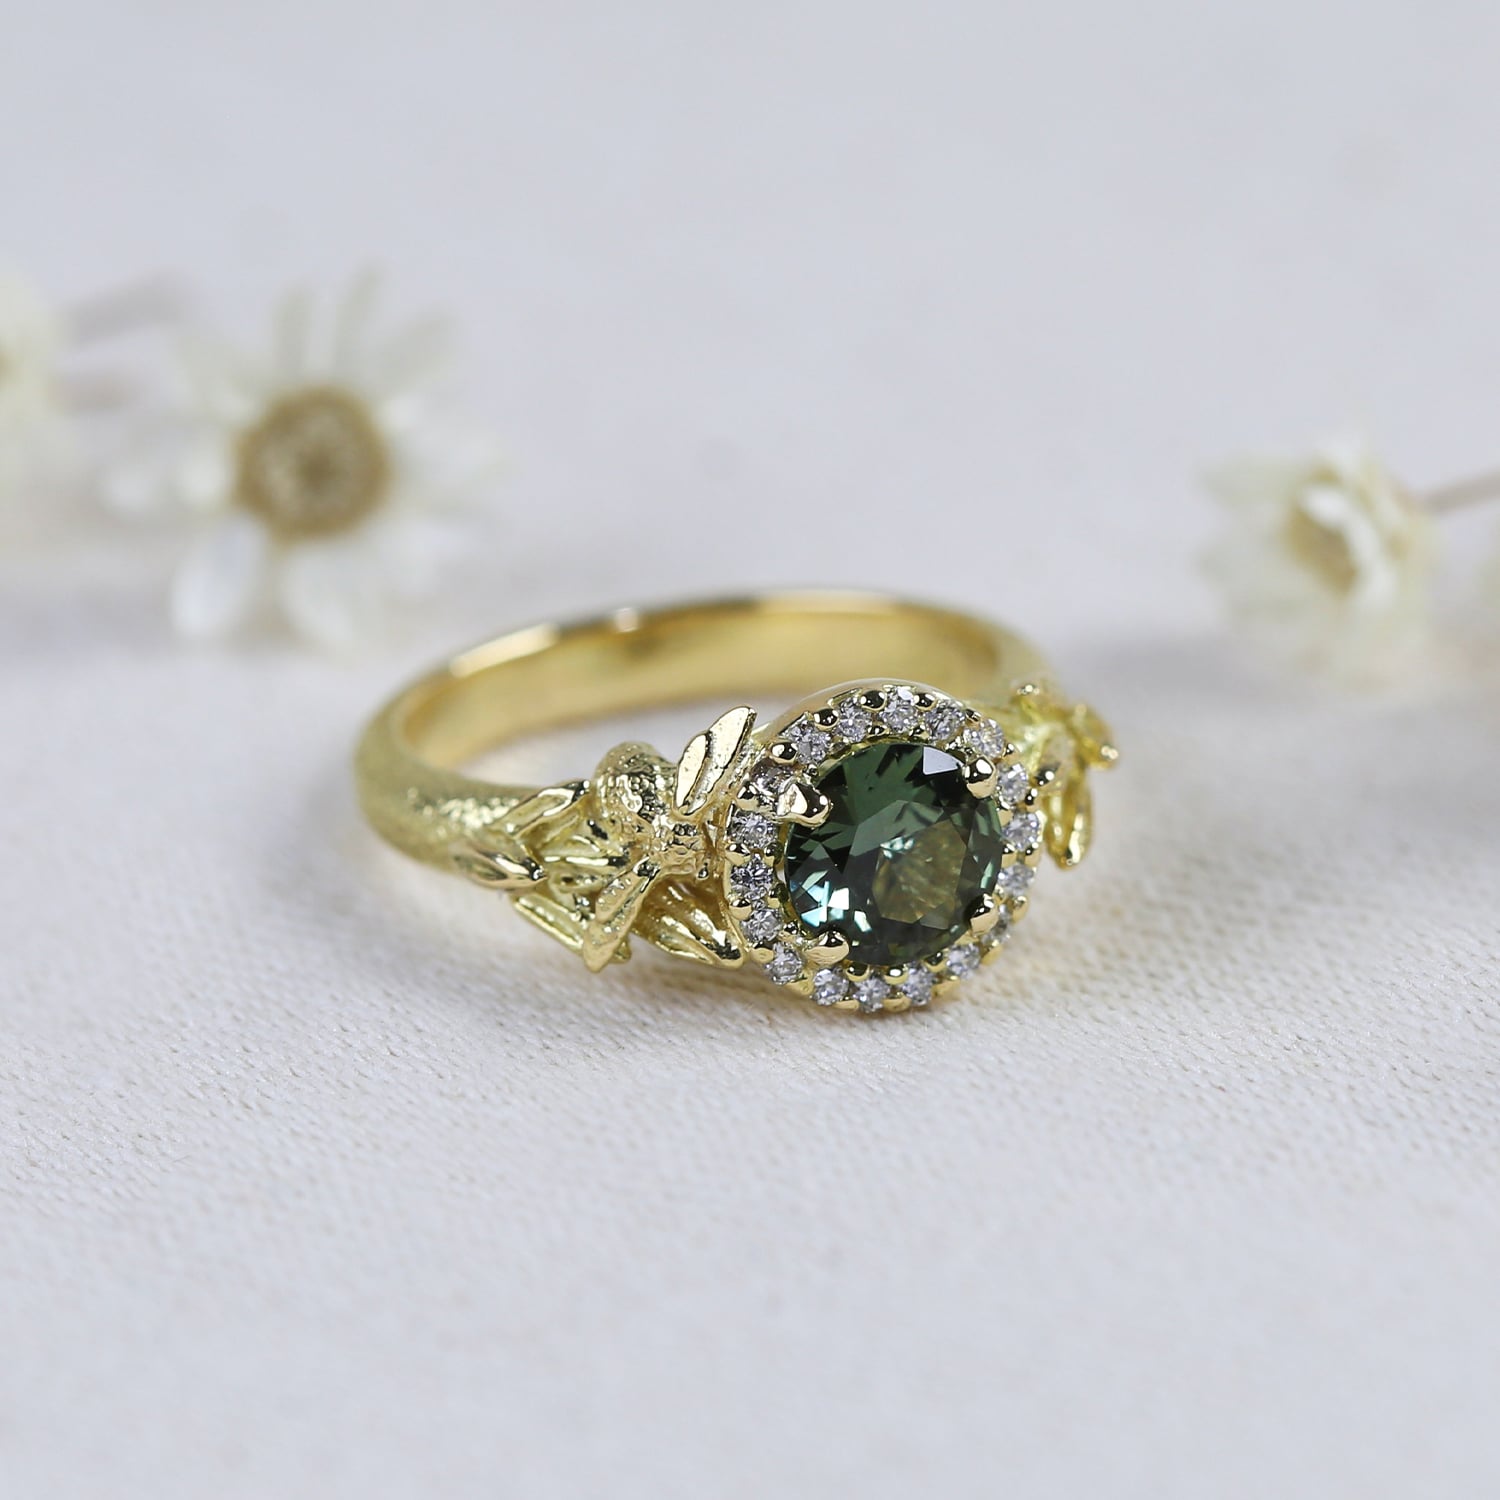 emerald gemstone 18ct yellow gold bespoke design engagement ring shown held in jewellers pliers against white petals